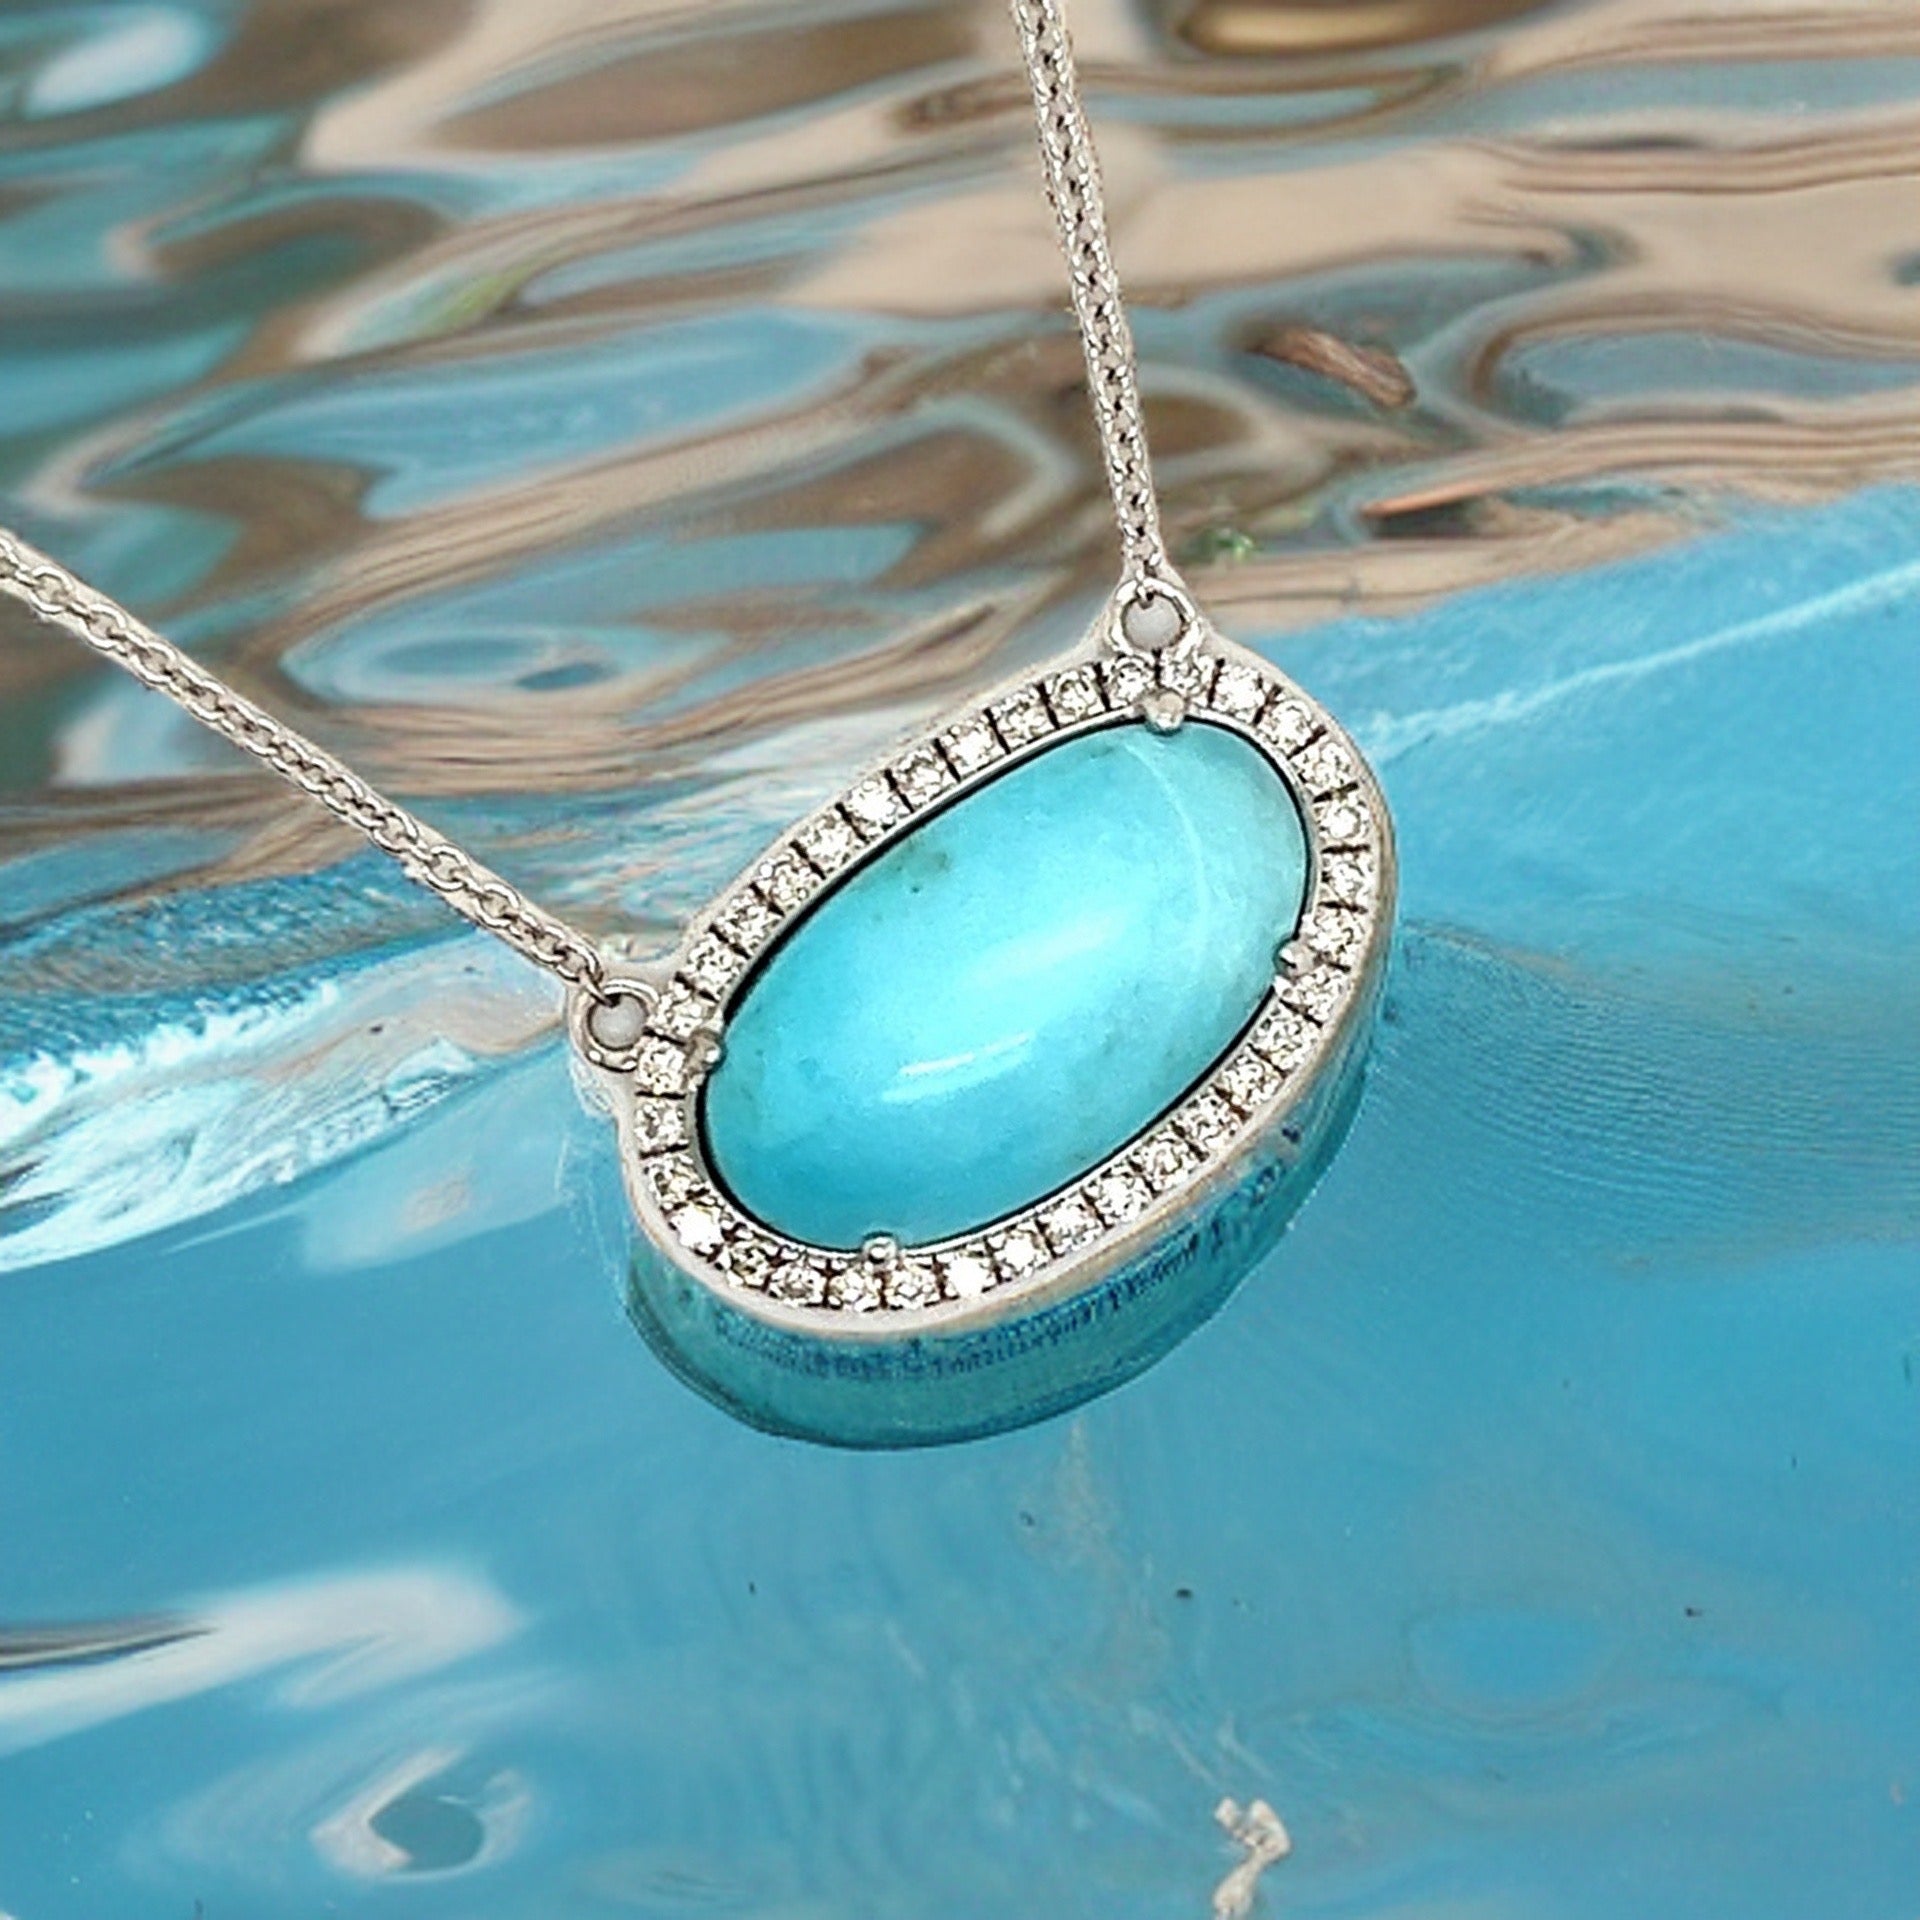 Natural Persian Turquoise Diamond Halo Pendant With Chain 18.5" 14k WG 8.1 TCW Certified $4,975 300679 - Certified Fine Jewelry